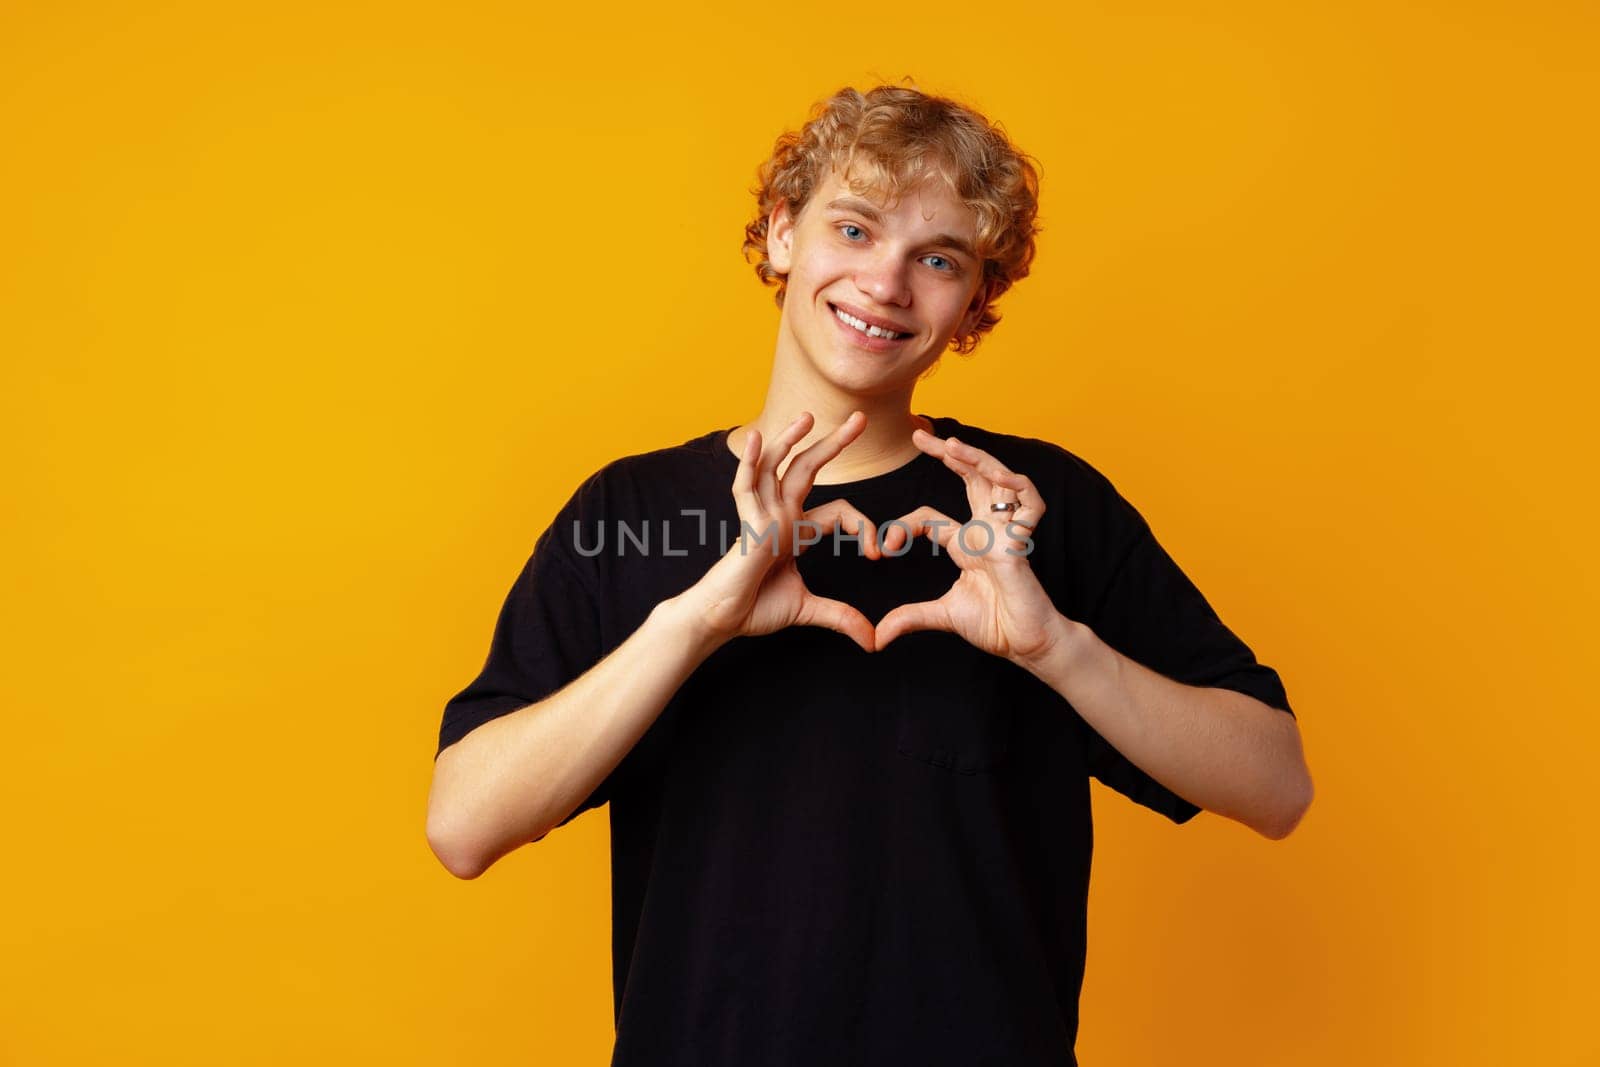 Young man on yellow background smiling and showing a heart shape with hands close up